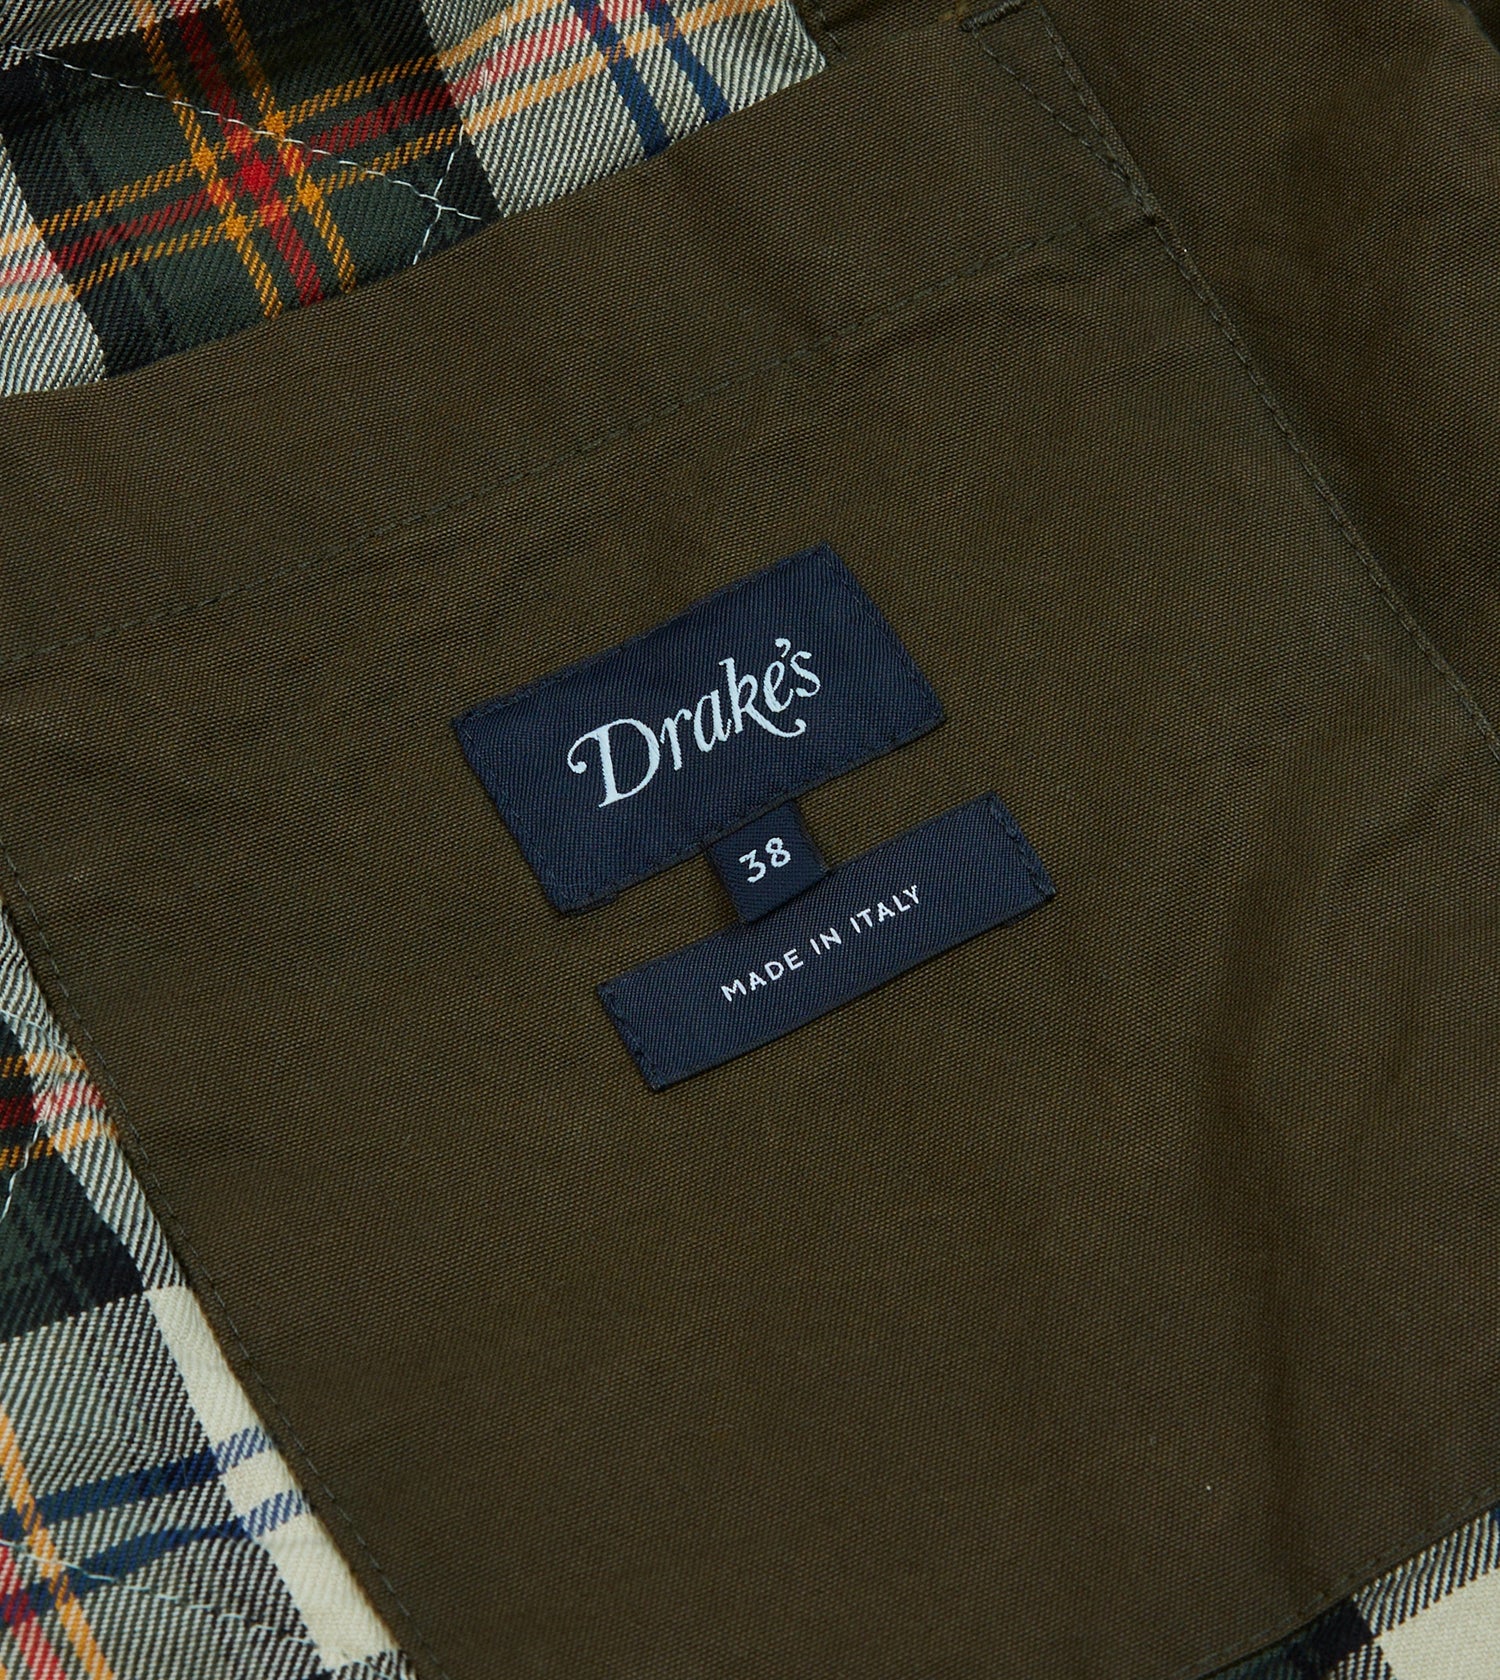 Green Waxed Cotton Wader Jacket with Blanket Lining